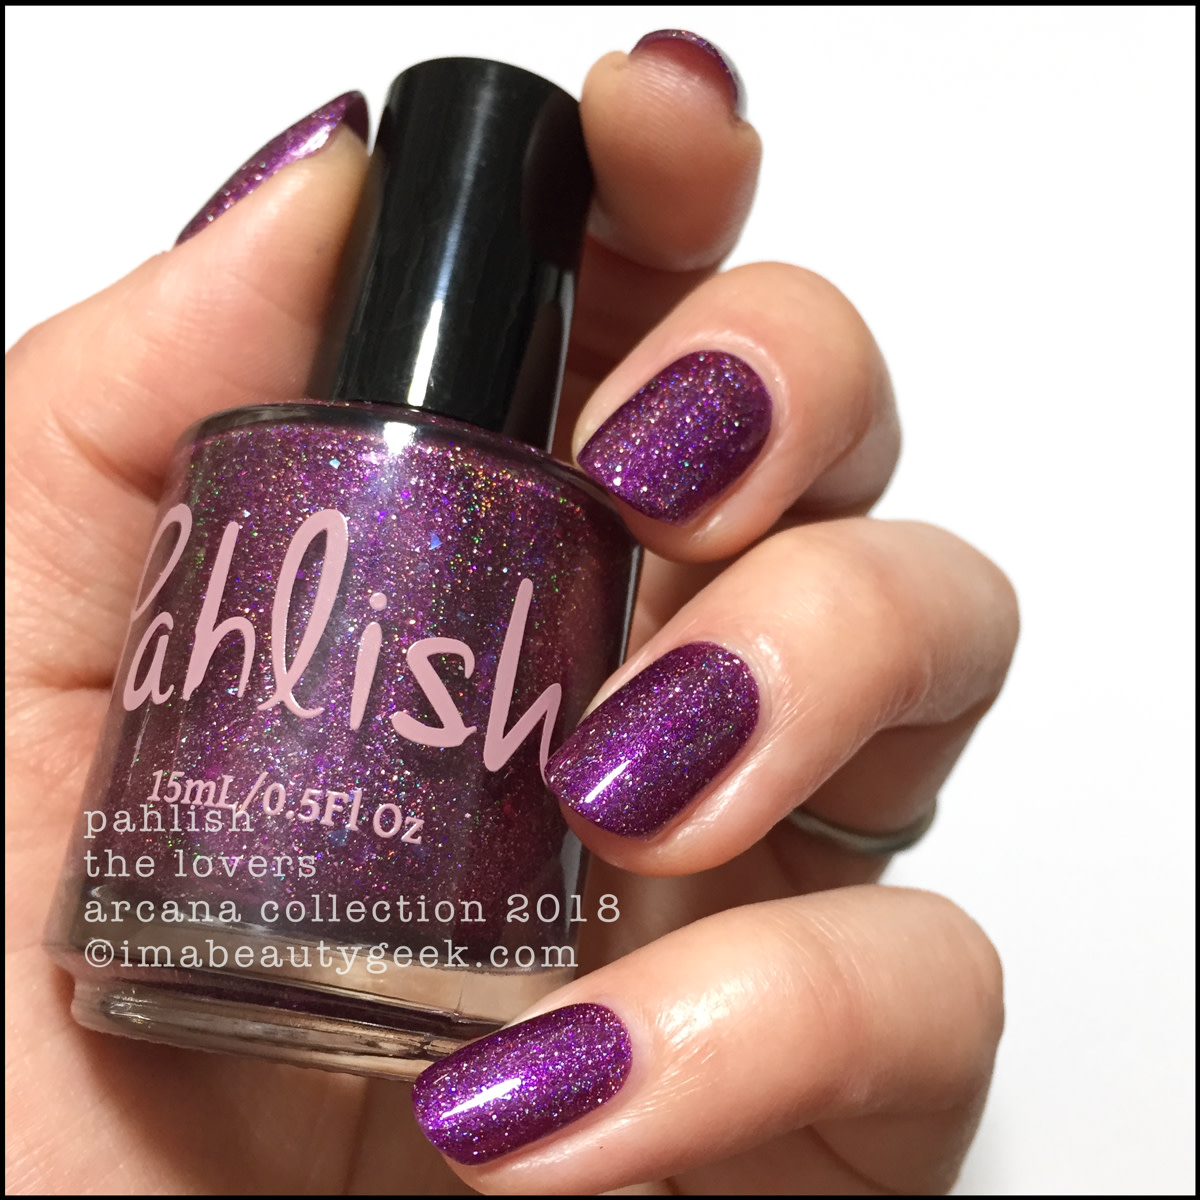 Pahlish The Lovers 2 - Pahlish Arcana Collection Swatches Review 2018